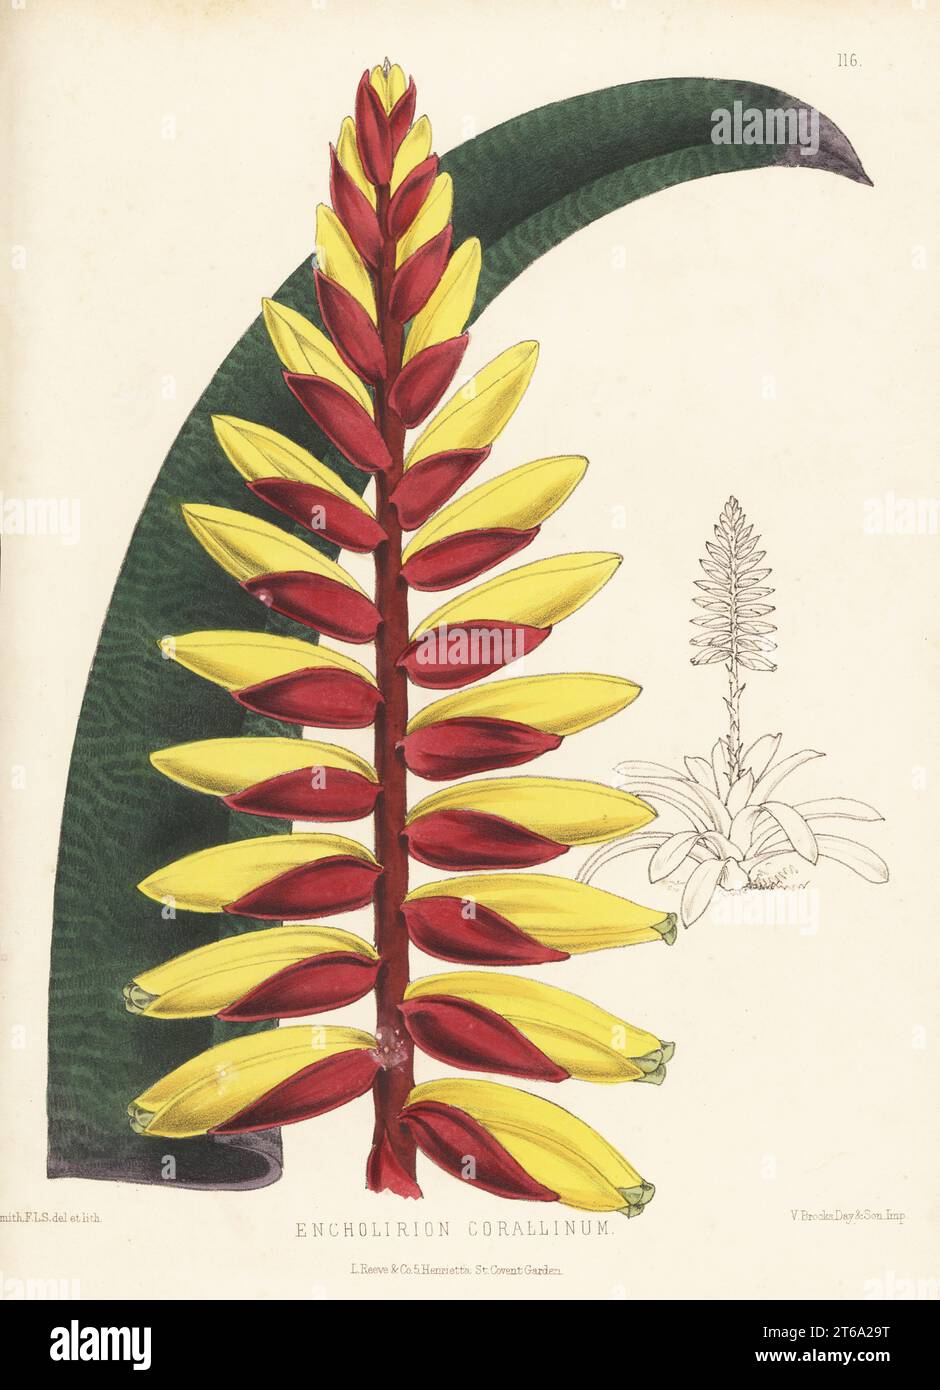 Vriesea platynema, bromeliad native to the West Indies and South America. Imported by nurseryman William Bull, King's Road, Chelsea. As Encholirion corallinum. Handcolored botanical illustration drawn and lithographed by Worthington George Smith from Henry Honywood Dombrain's Floral Magazine, New Series, Volume 3, L. Reeve, London, 1874. Lithograph printed by Vincent Brooks, Day & Son. Stock Photo